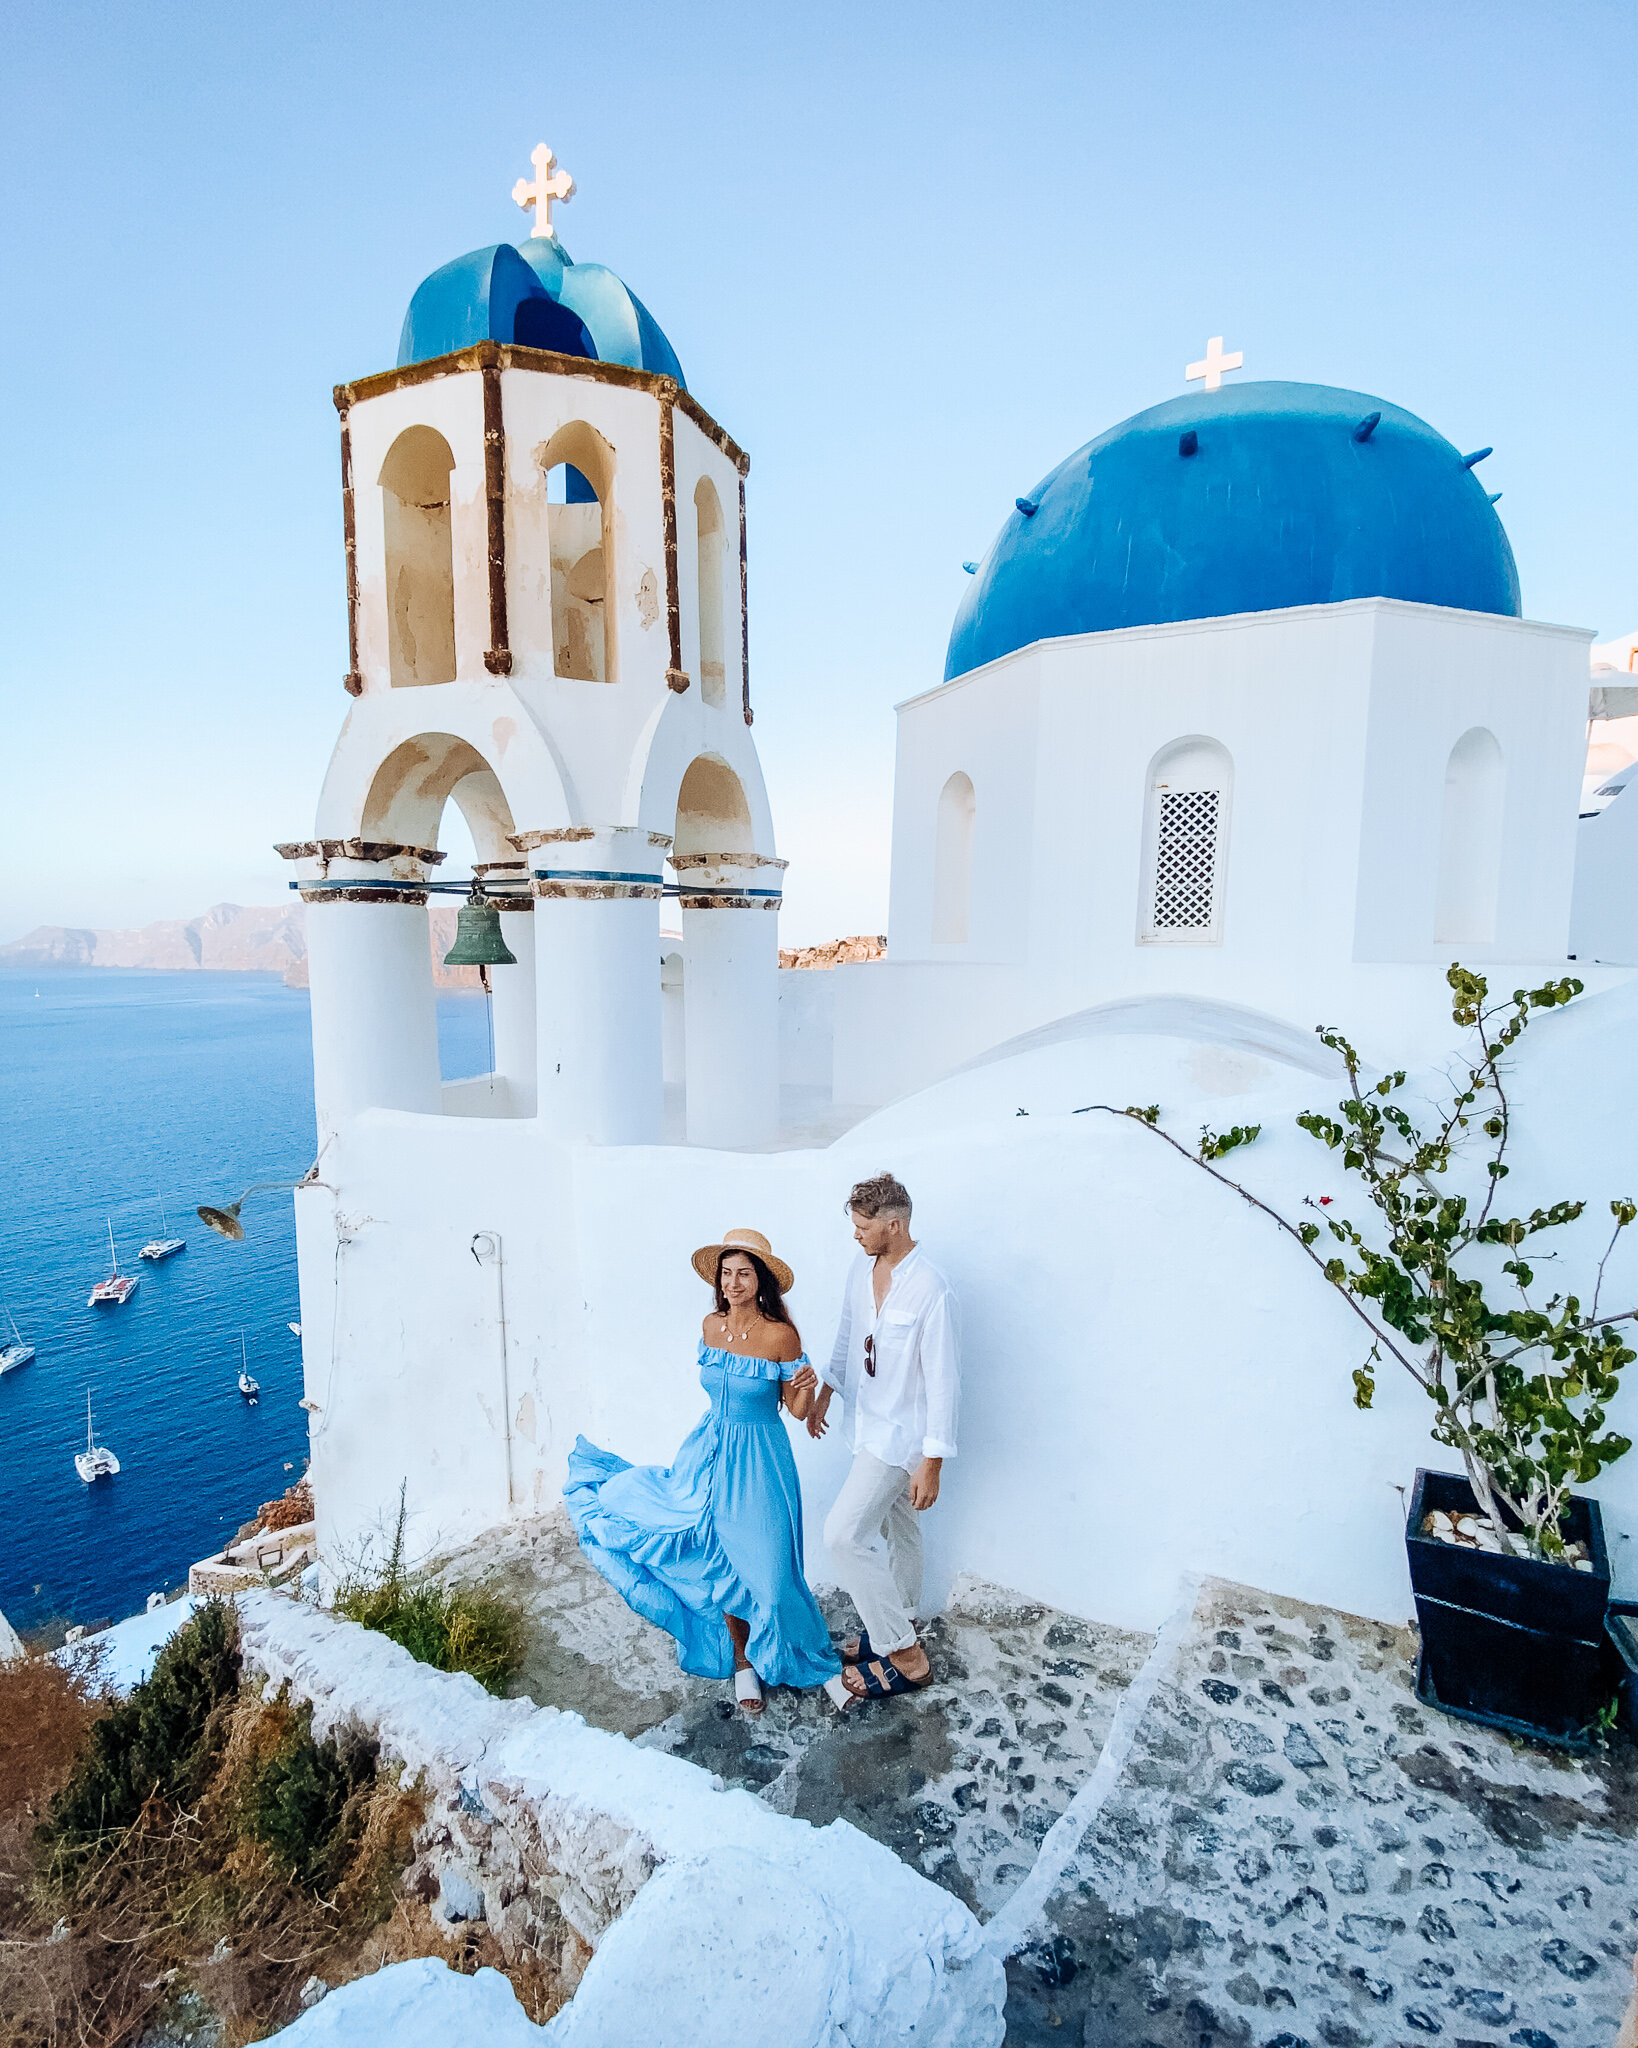 3 Blue Domes In Santorini, Instagrammable Locations